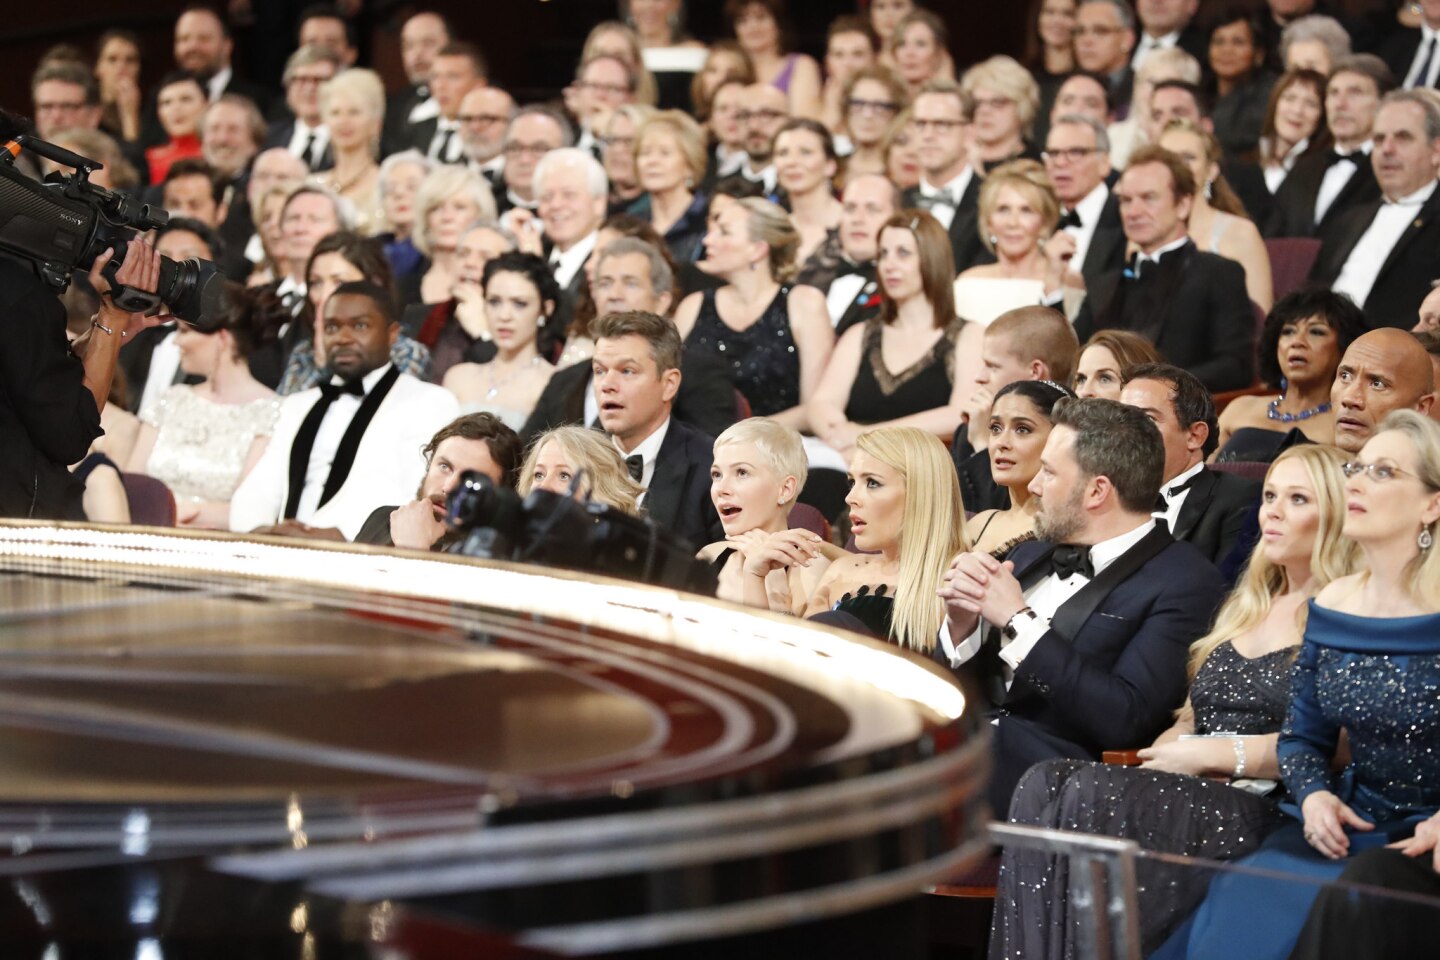 The audience appears stunned upon learning "La La Land" was mistakenly named the best picture winner.